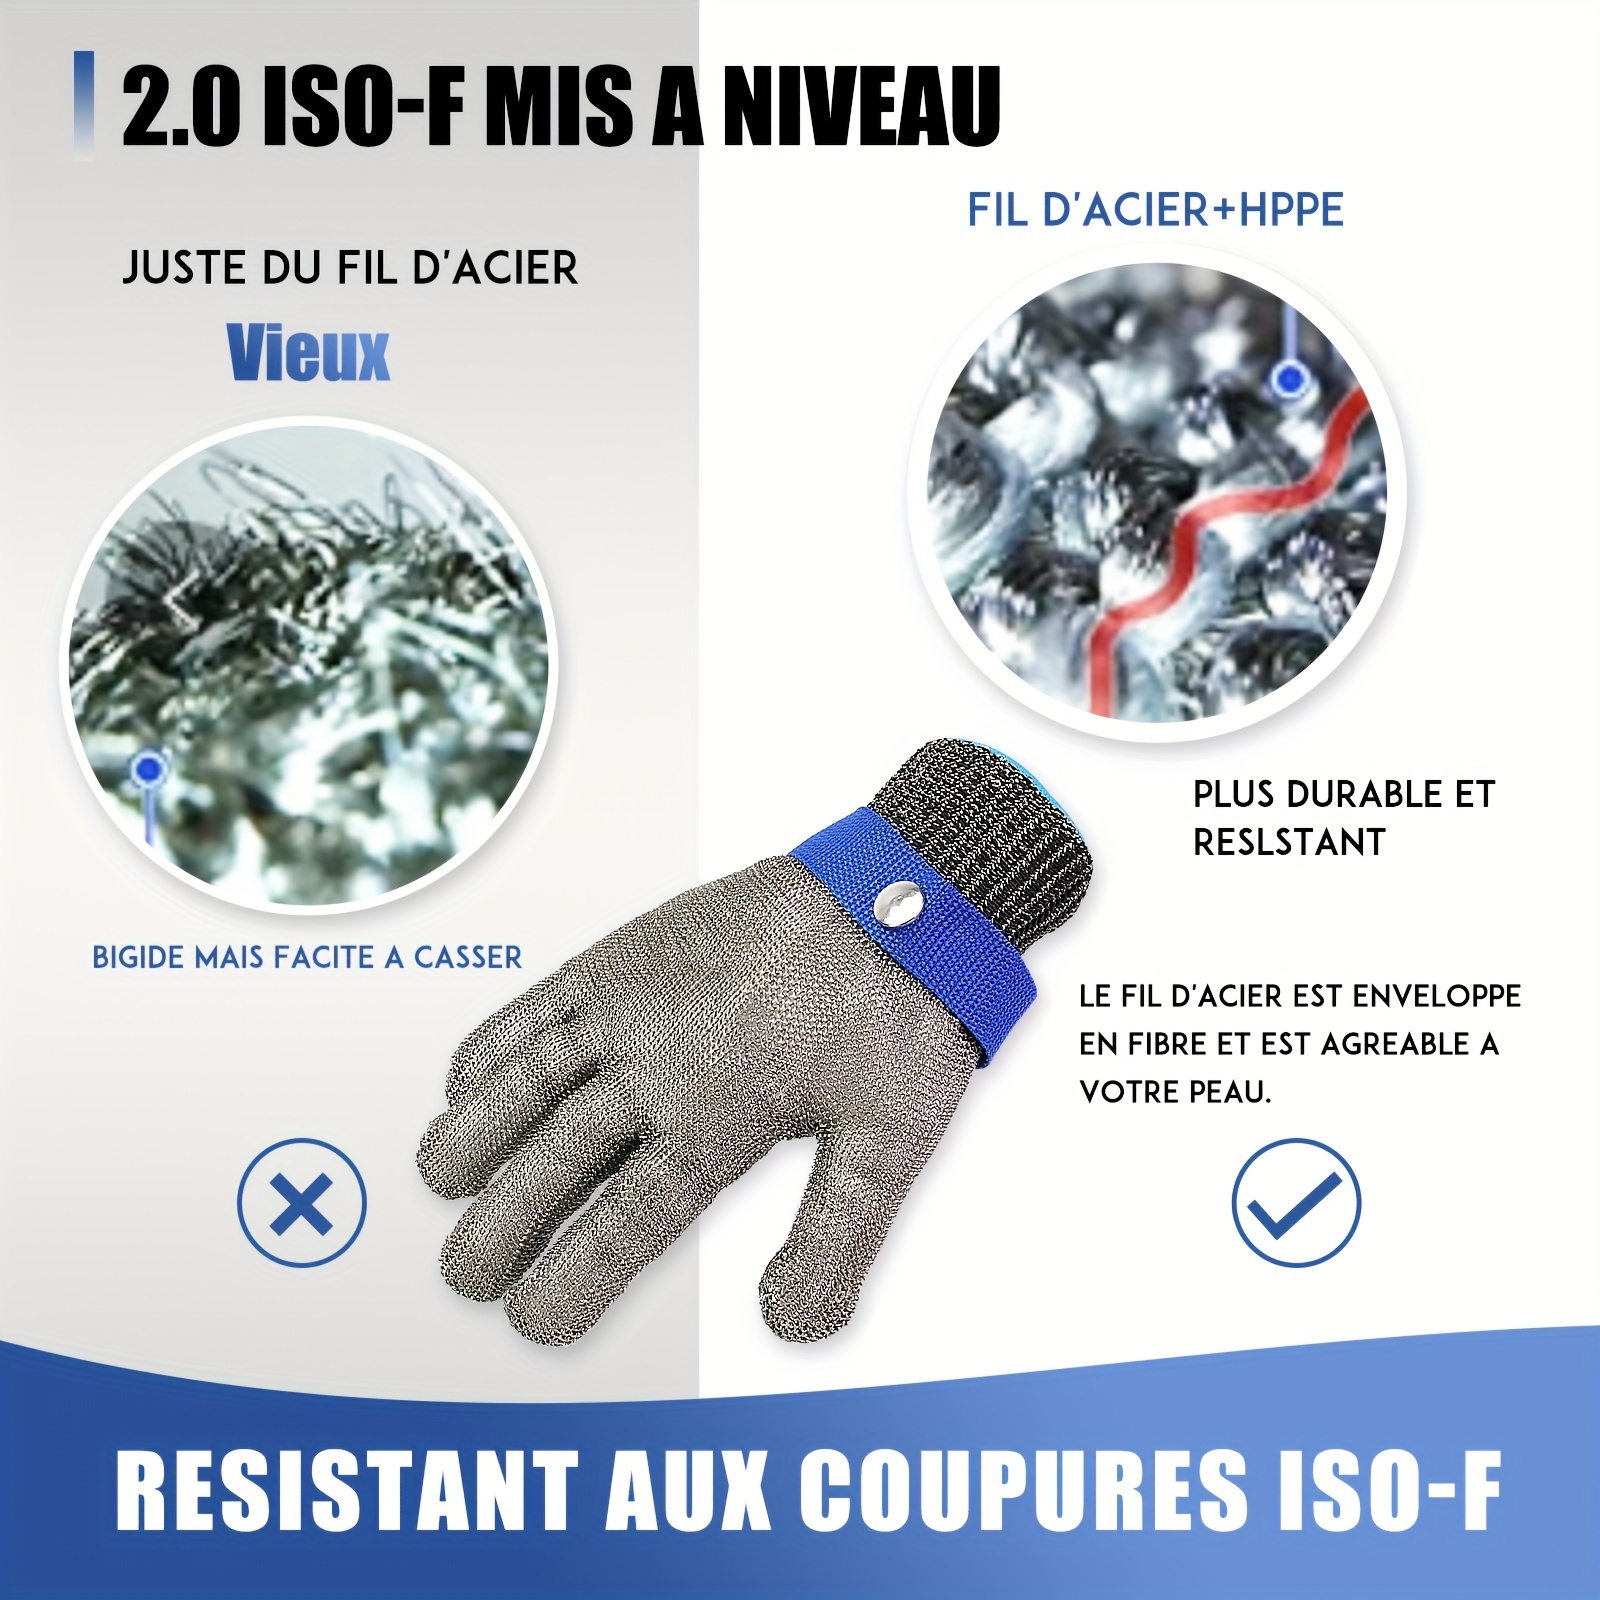 1 Pair 316L Stainless Steel Gloves, Meat Cutting Oyster Shucking Fish  Fillet, A9 Cut Resistant Gloves, 2.0 Upgraded Food Grade Stainless Steel  Mesh Me